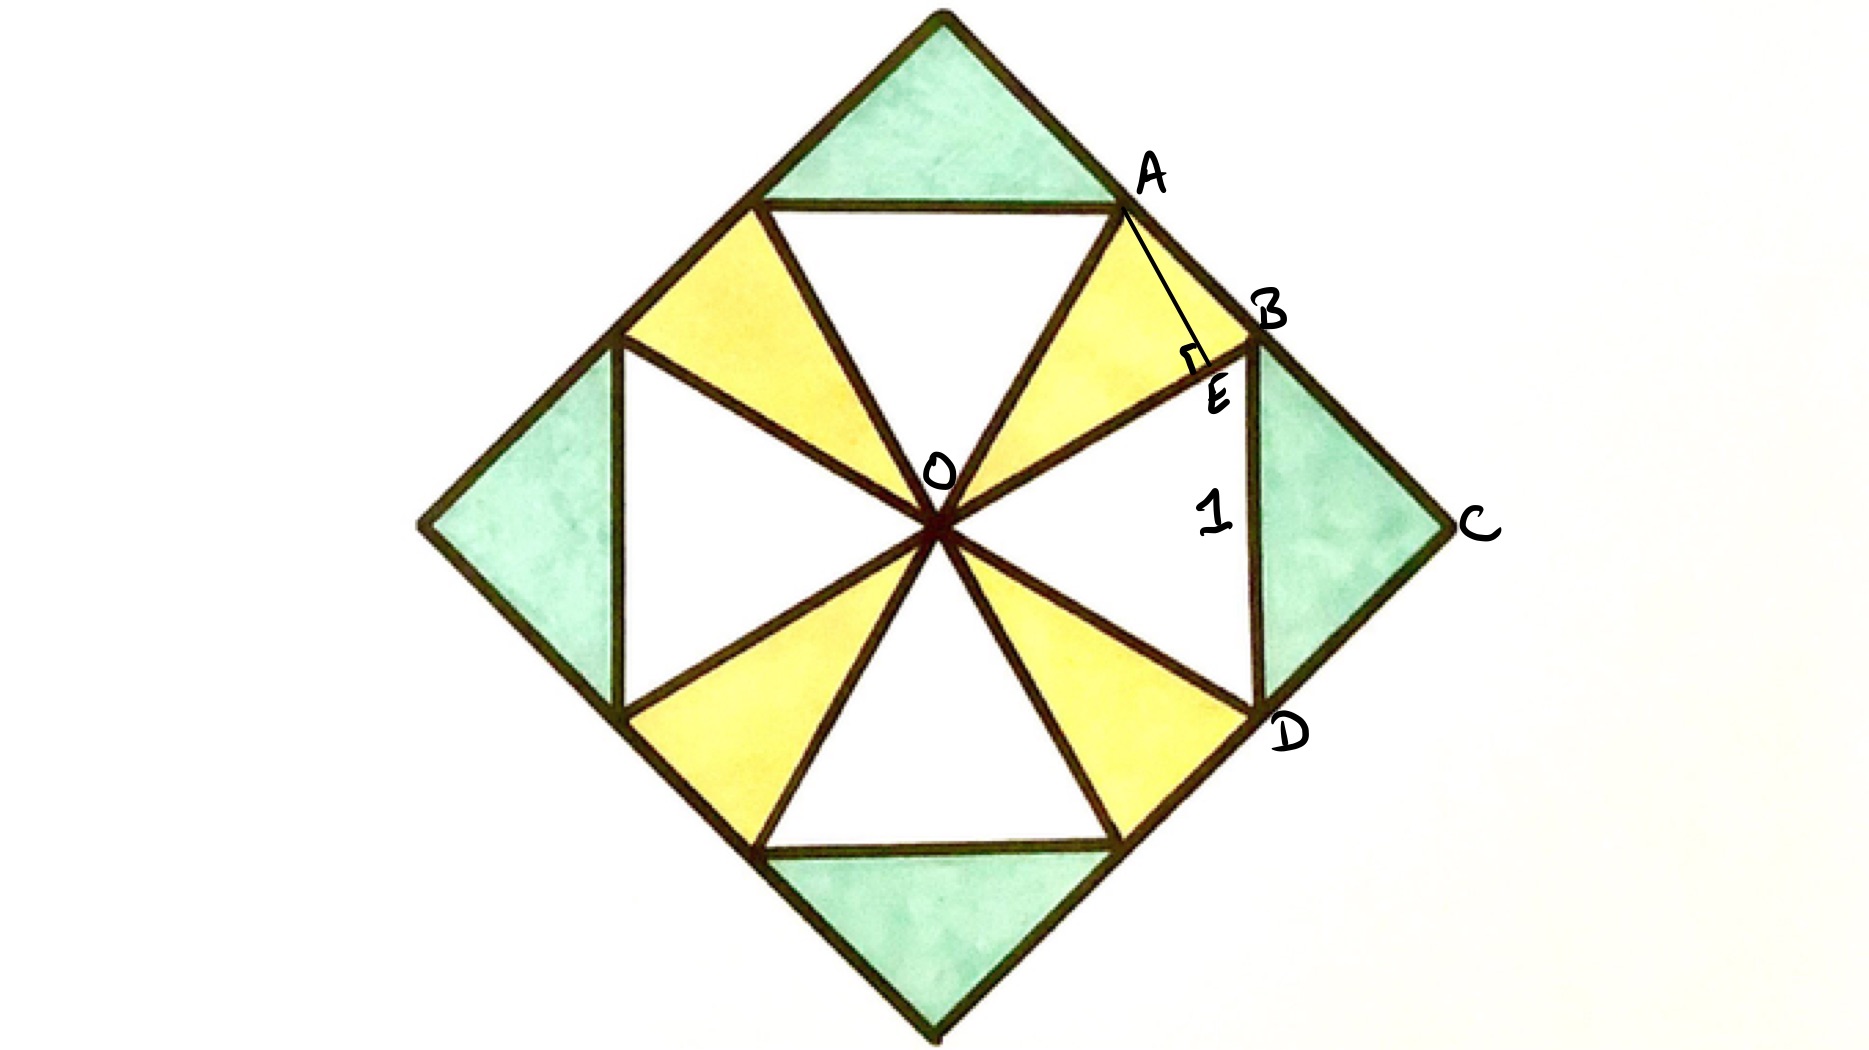 Four triangles in a square labelled